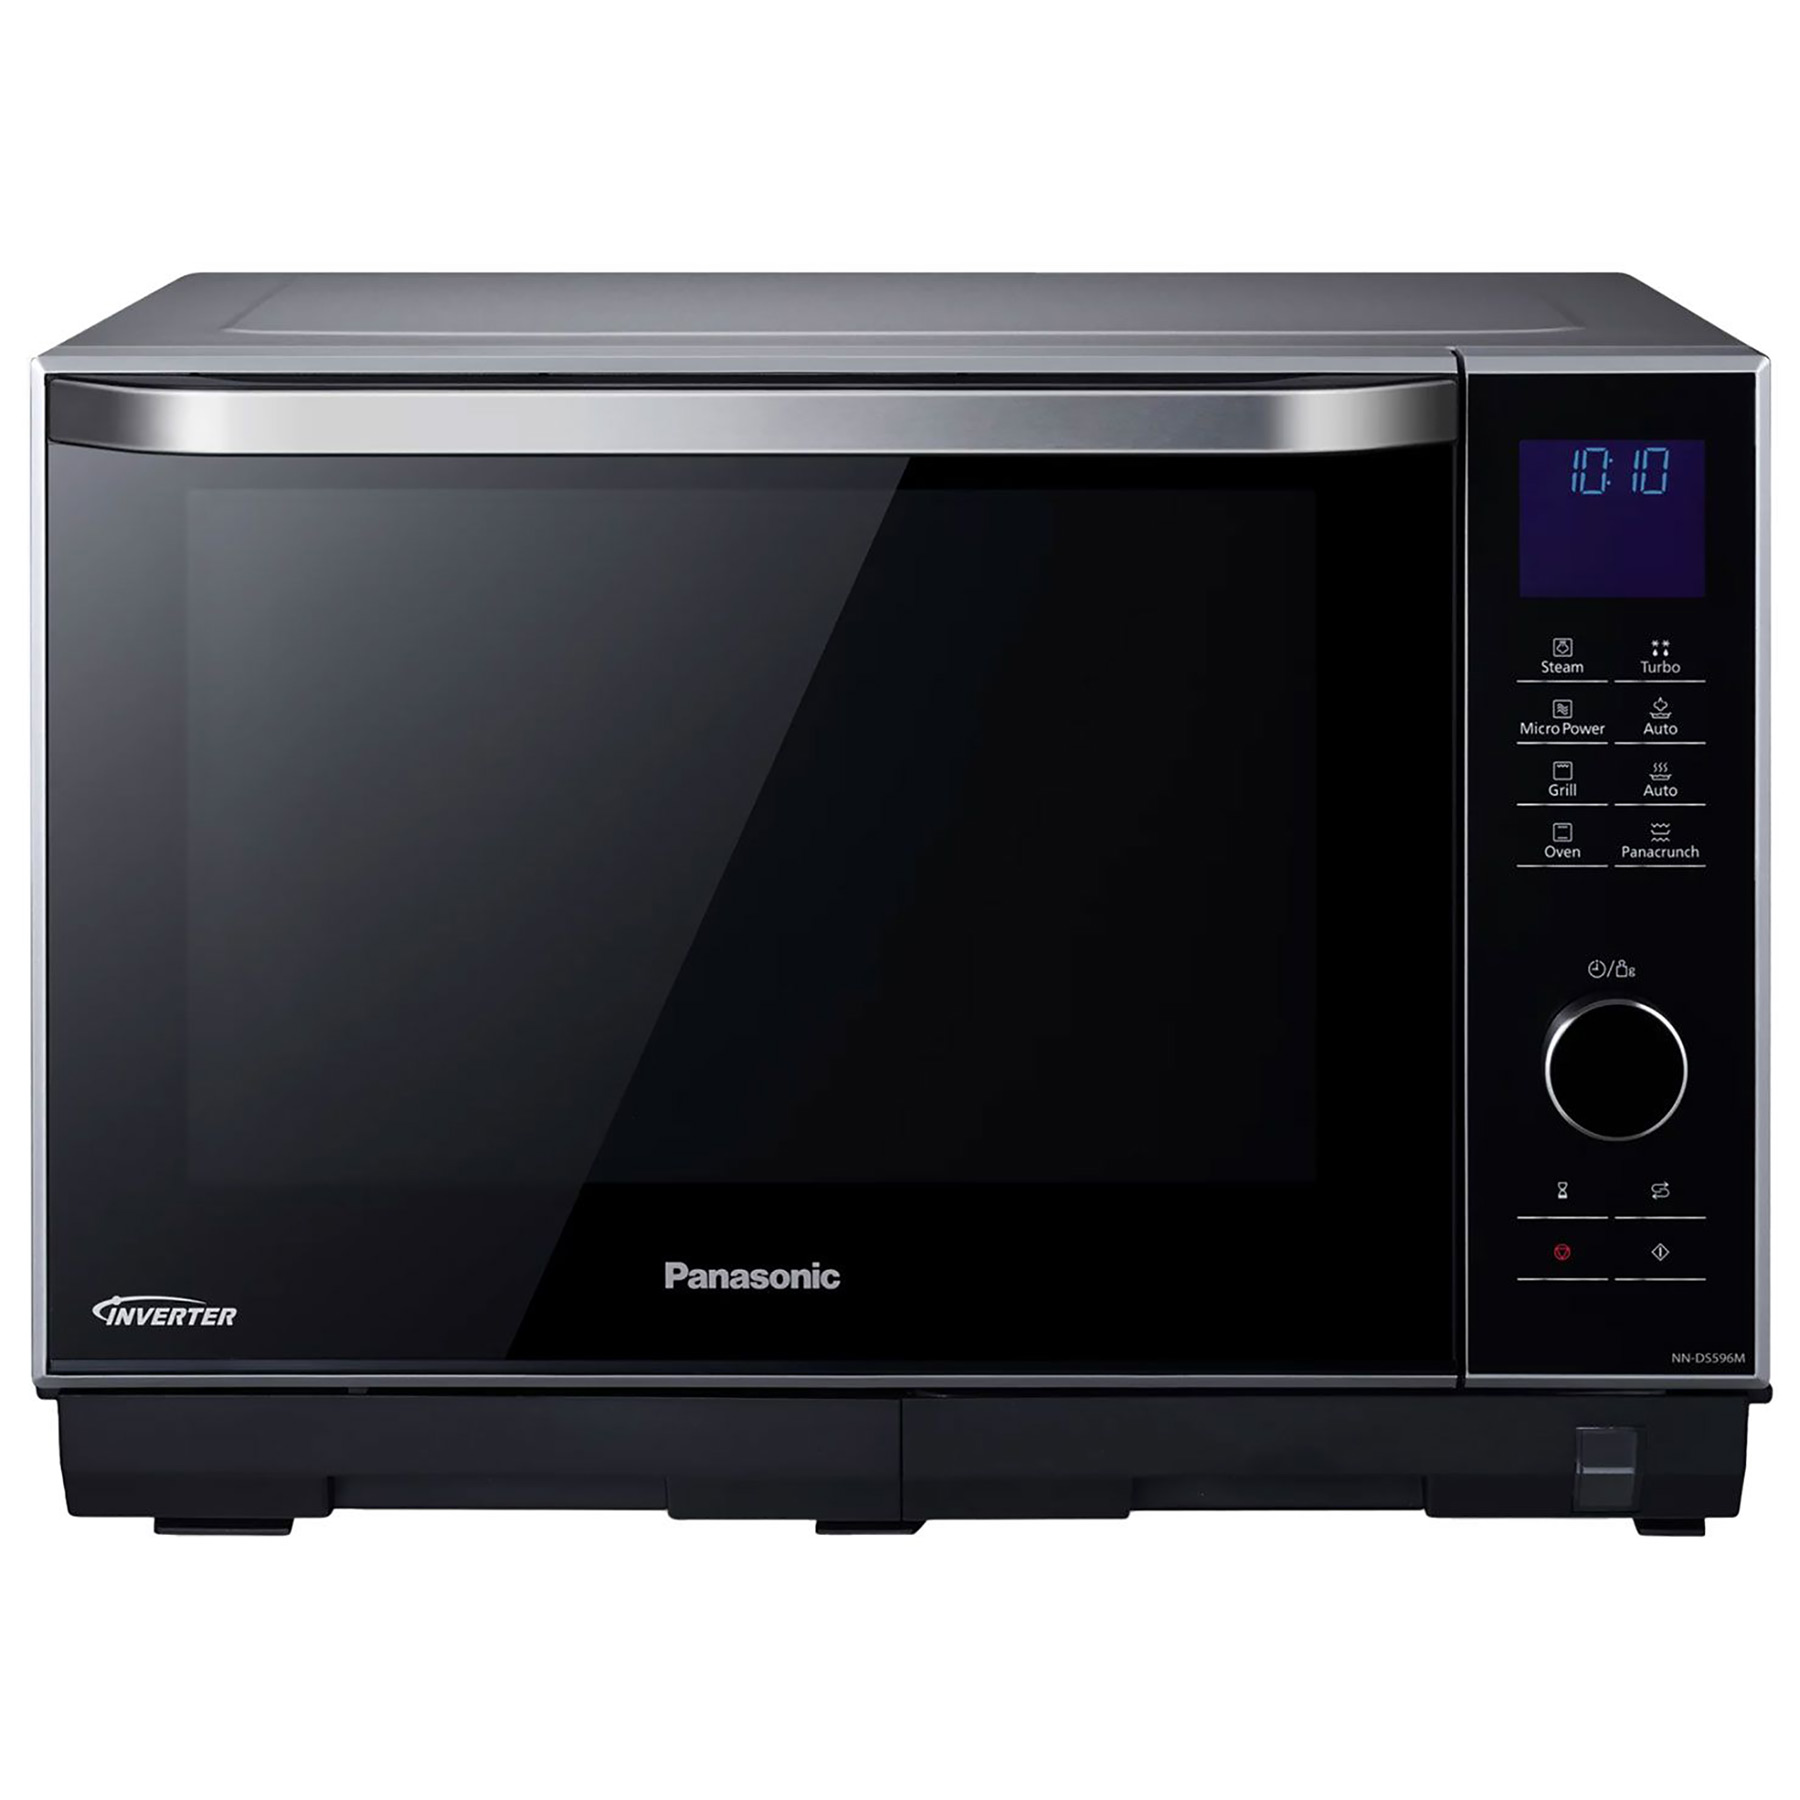 Panasonic NN DS59NBBPQ 4 in 1 Steam Combi Microwave Oven in Black 27L